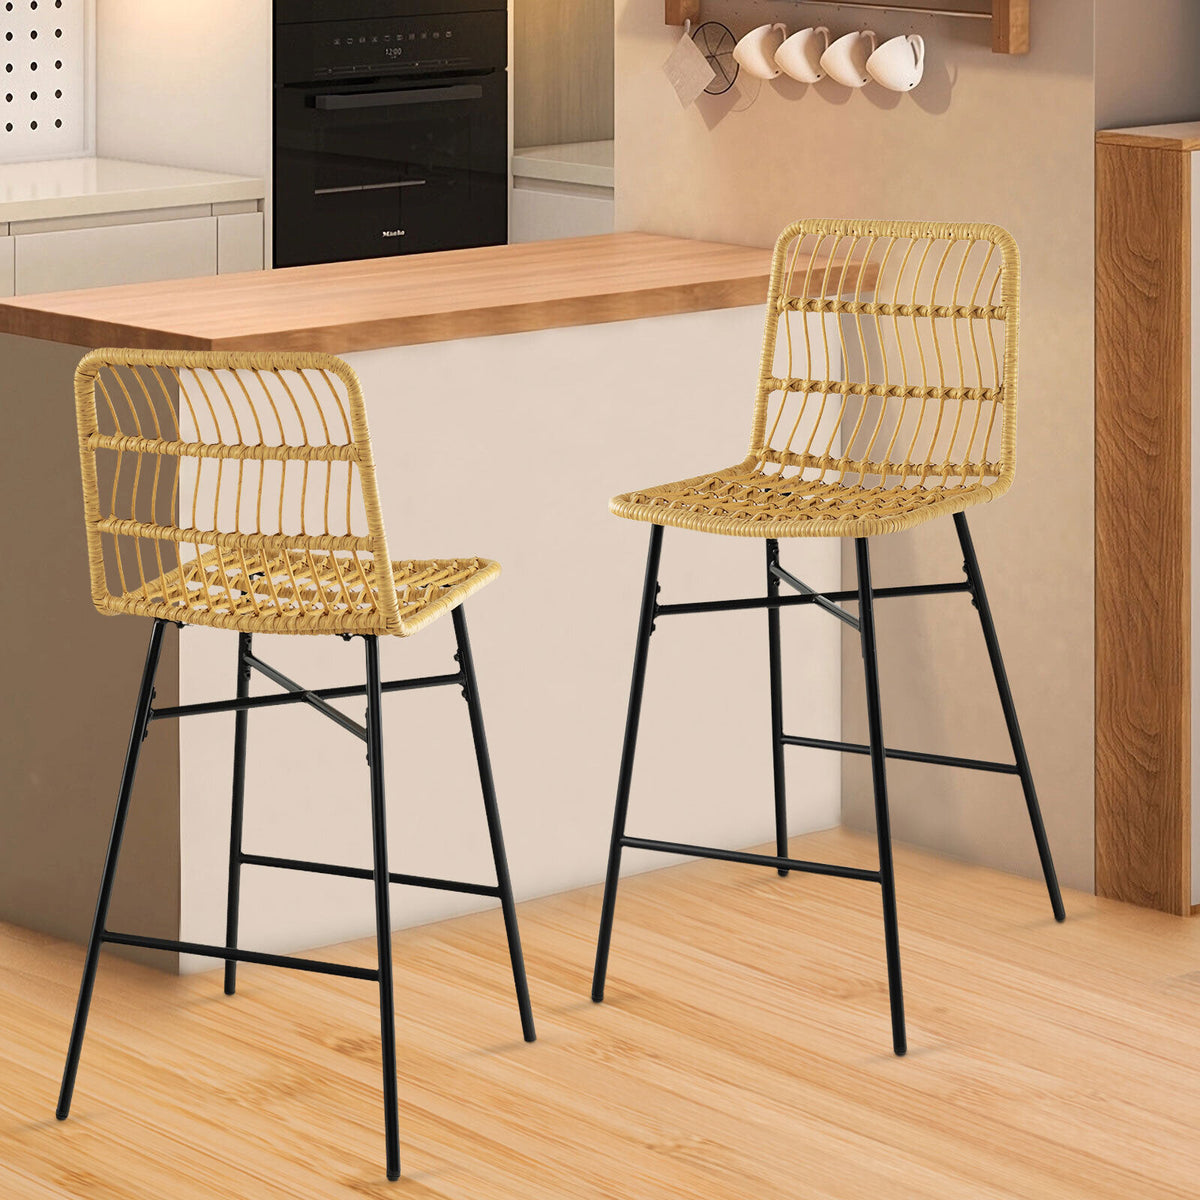 Set of 2 Rattan Bar Stools Counter Height Dining Chairs Natural